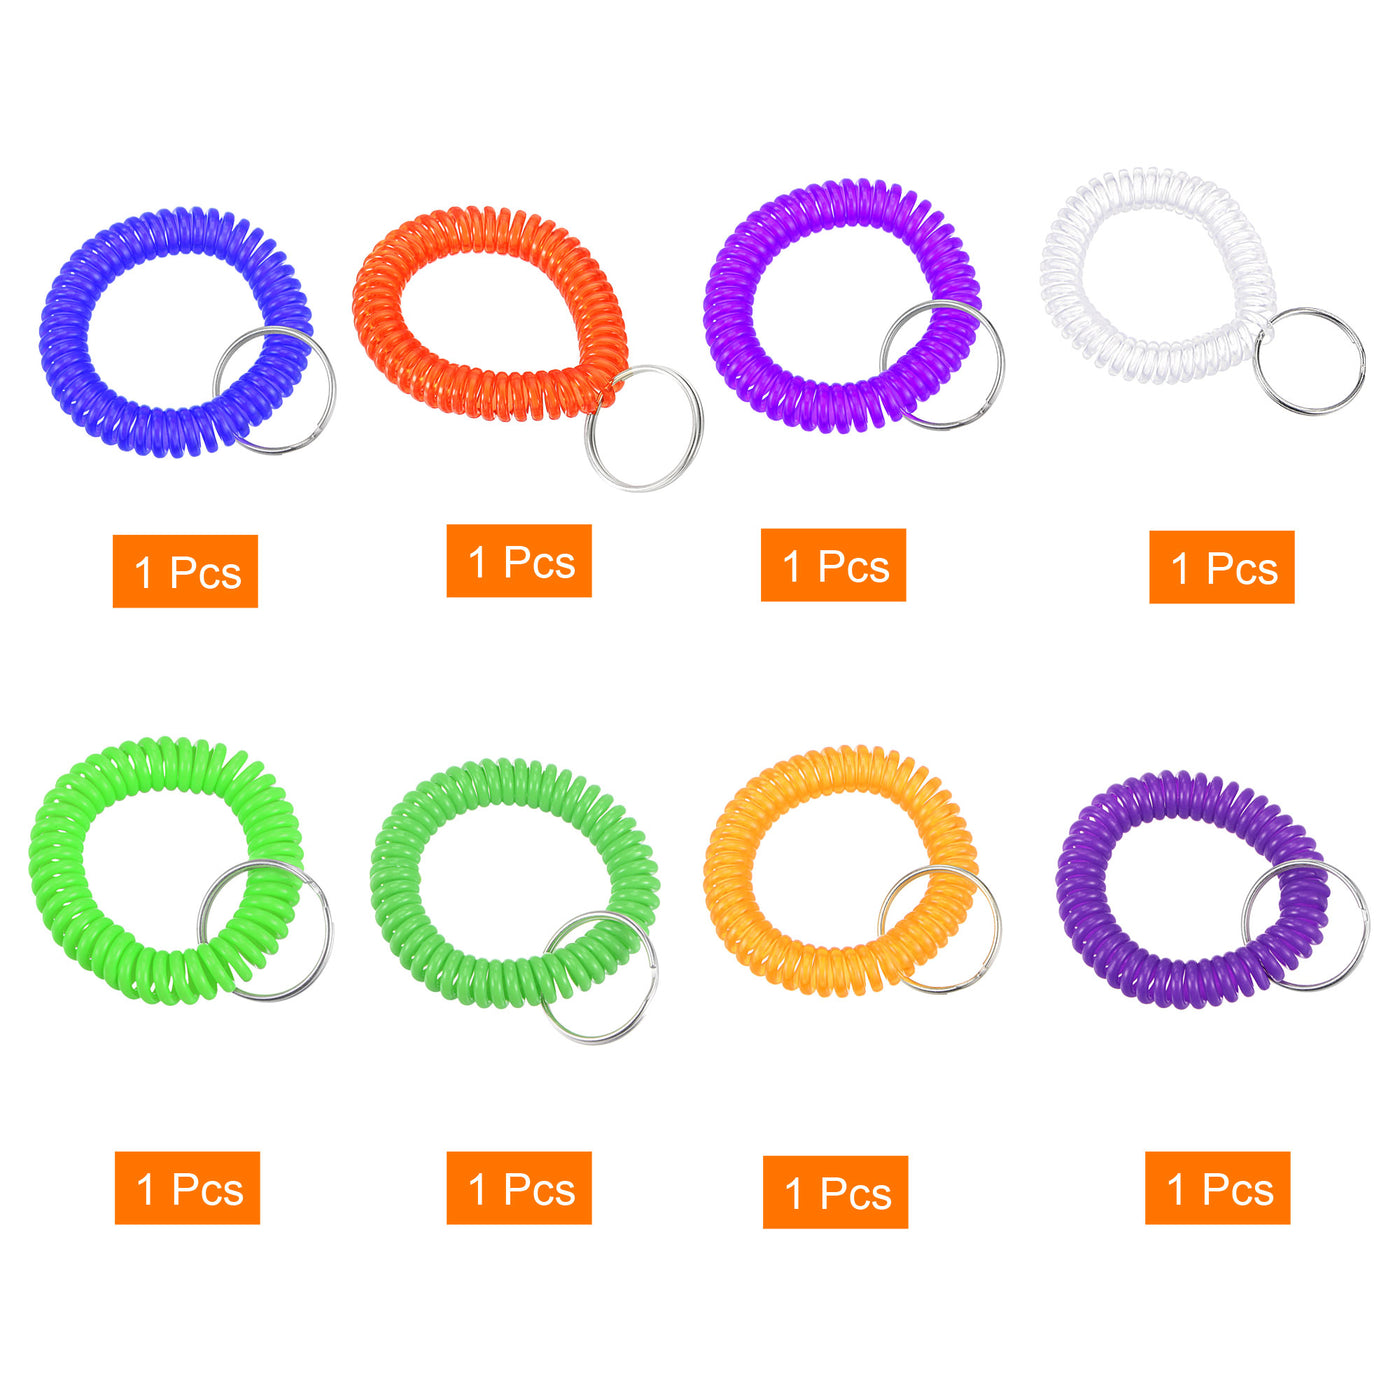 Harfington 22mm Spiral Keychain, 8 Pack Plastic Wrist Coil Keyring Wristband Stretchable Key Holder Lanyard for Sports Outdoor, 8 Colors